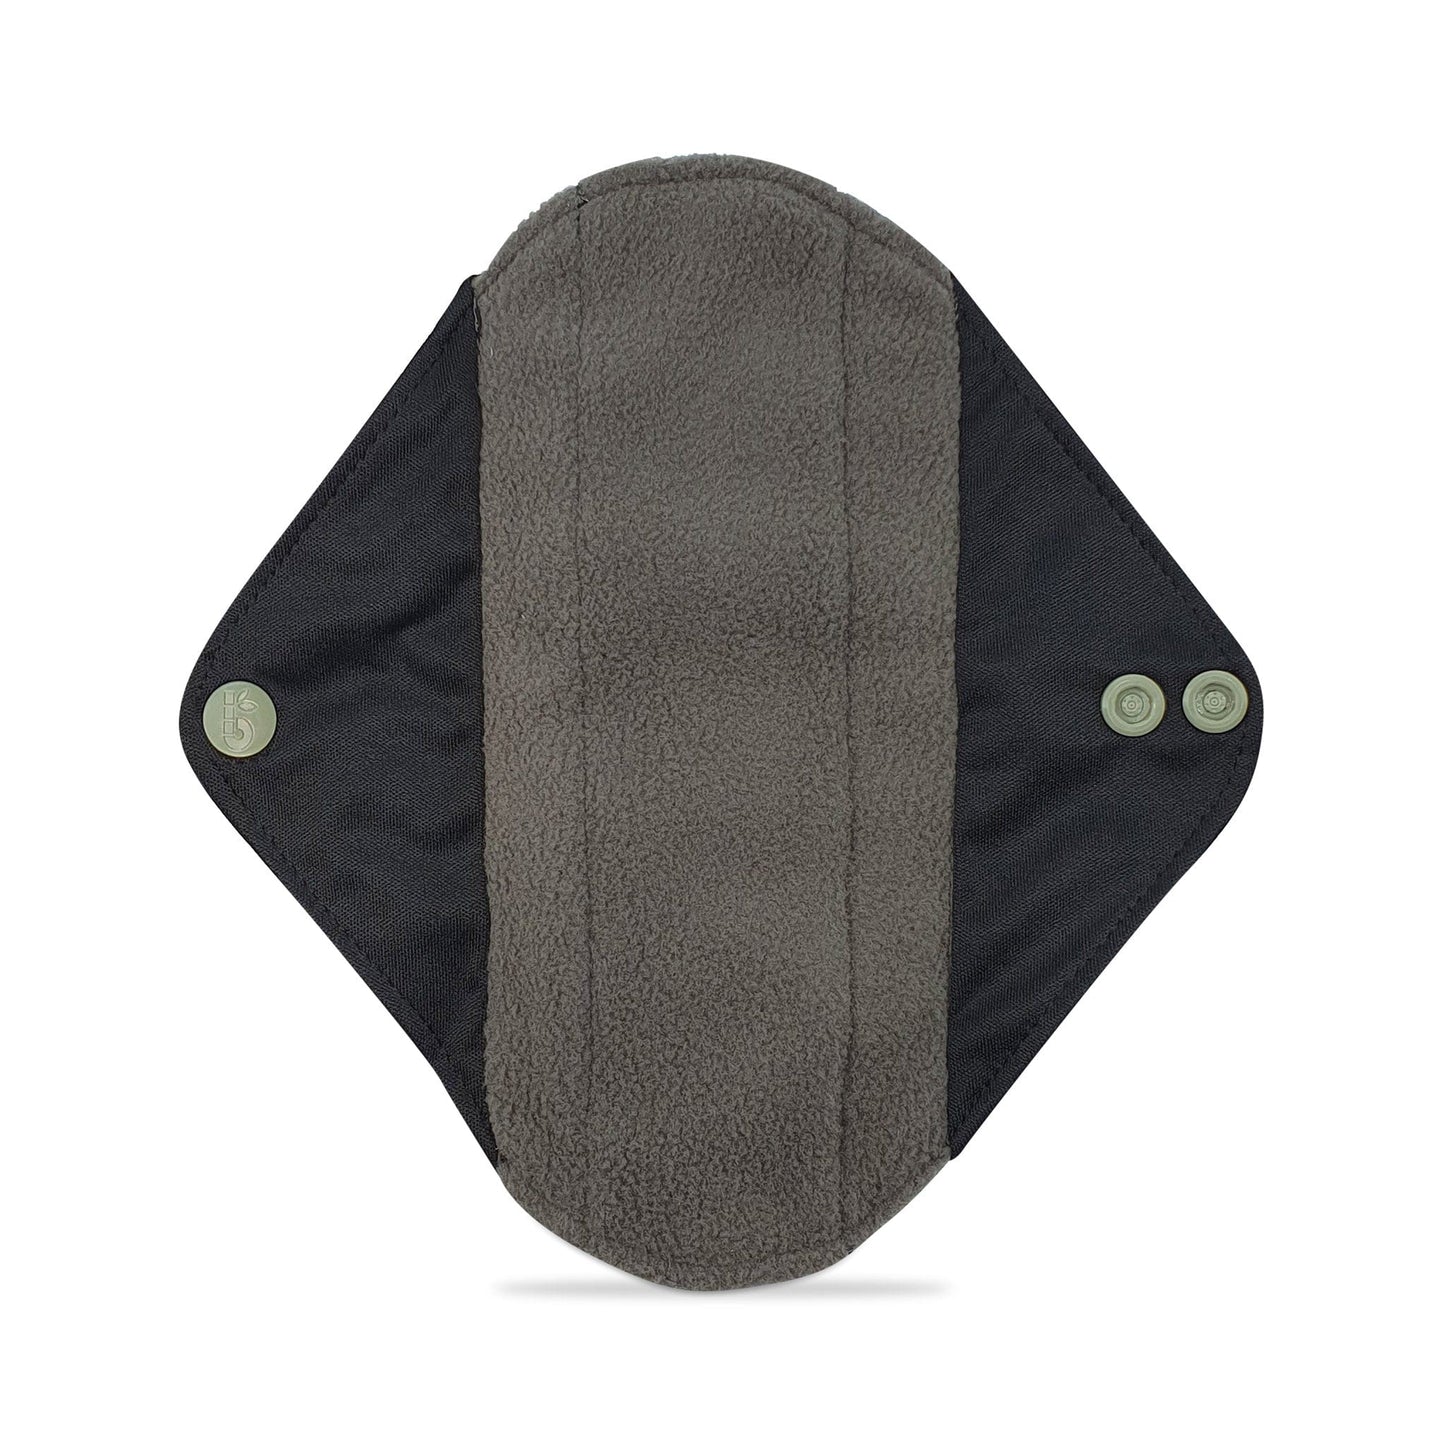 Bambaw Period Products Bamboo Charcoal Reusable Period Pad - Bambaw